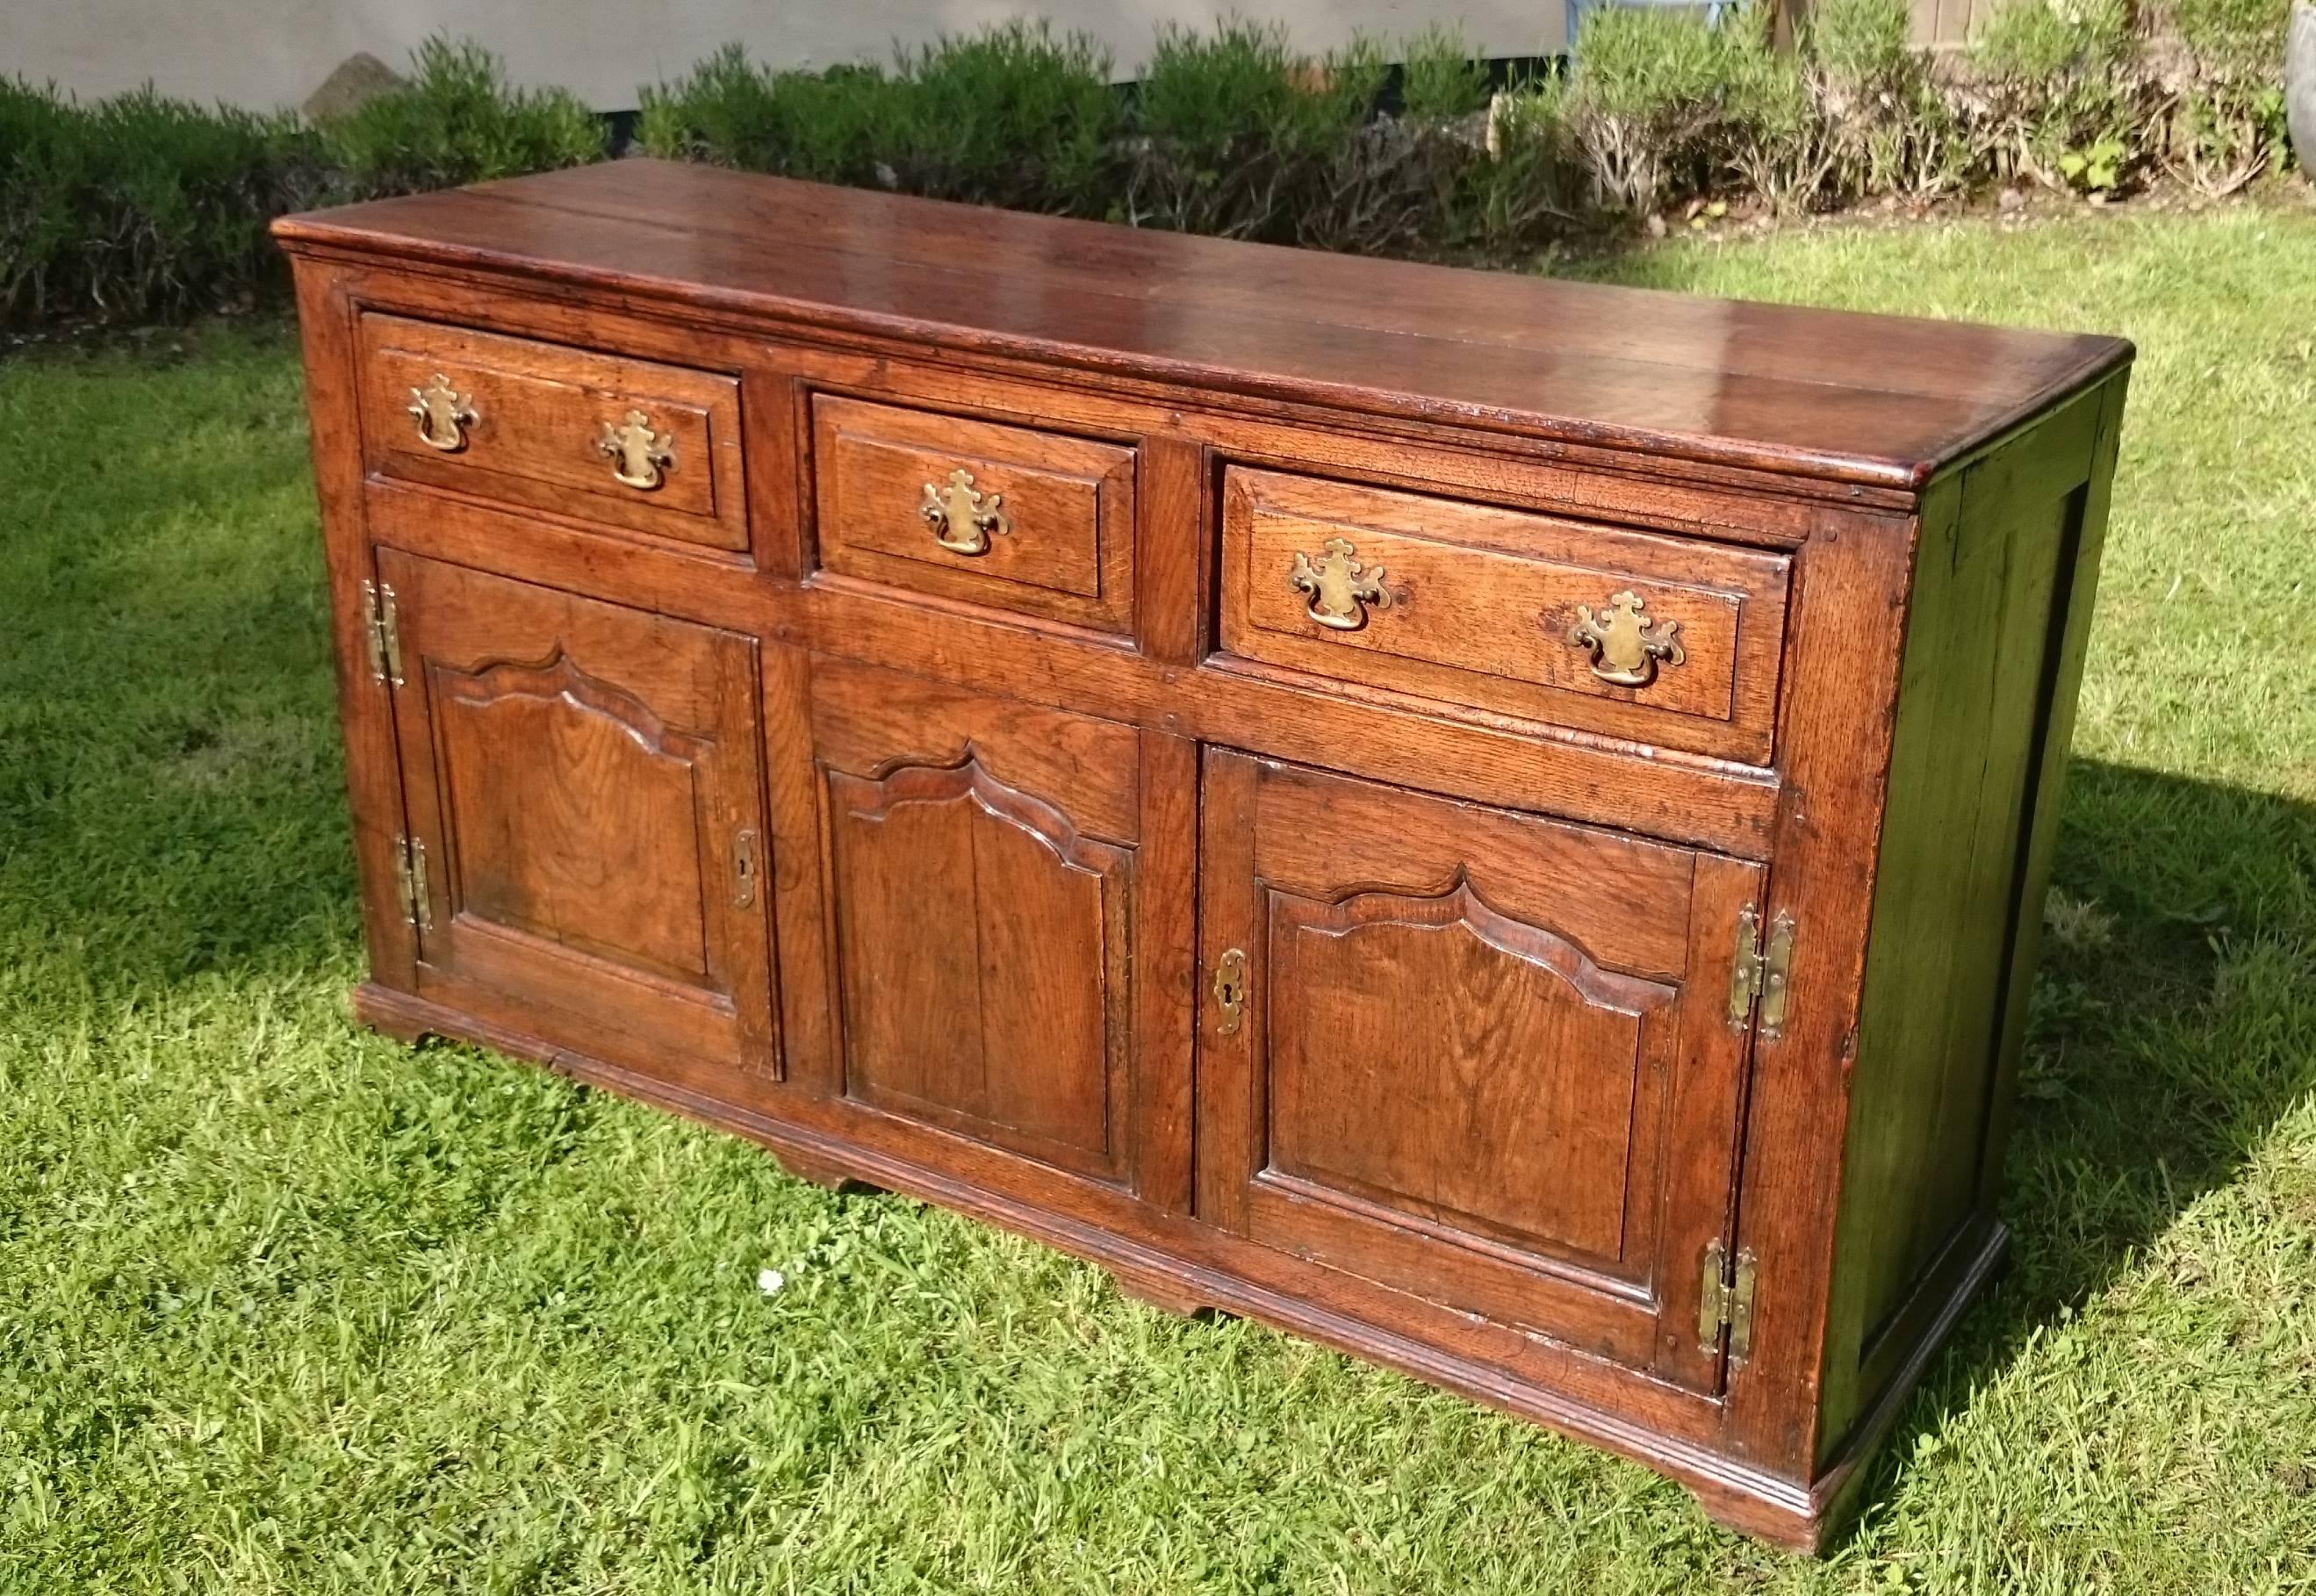 British 18th Century Dresser with Cupboards and Drawers